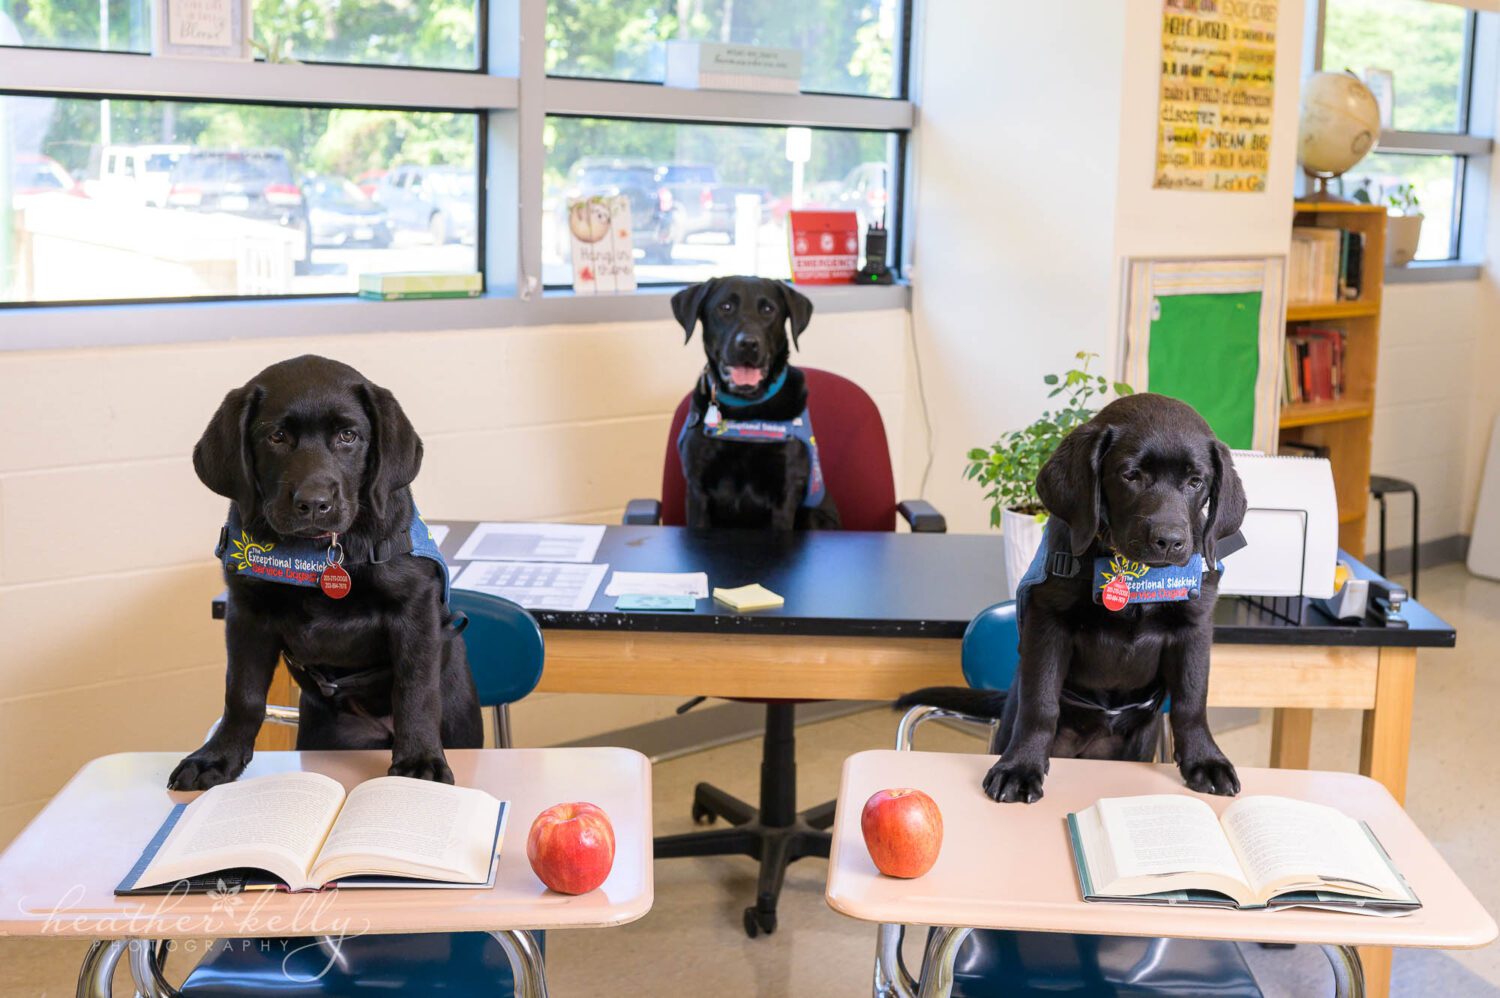 two service dogs in training sit at school desks in a classroom. There is an open text book and an apple on the desks. There is a third dog behind the puppies at the teachers desk. 